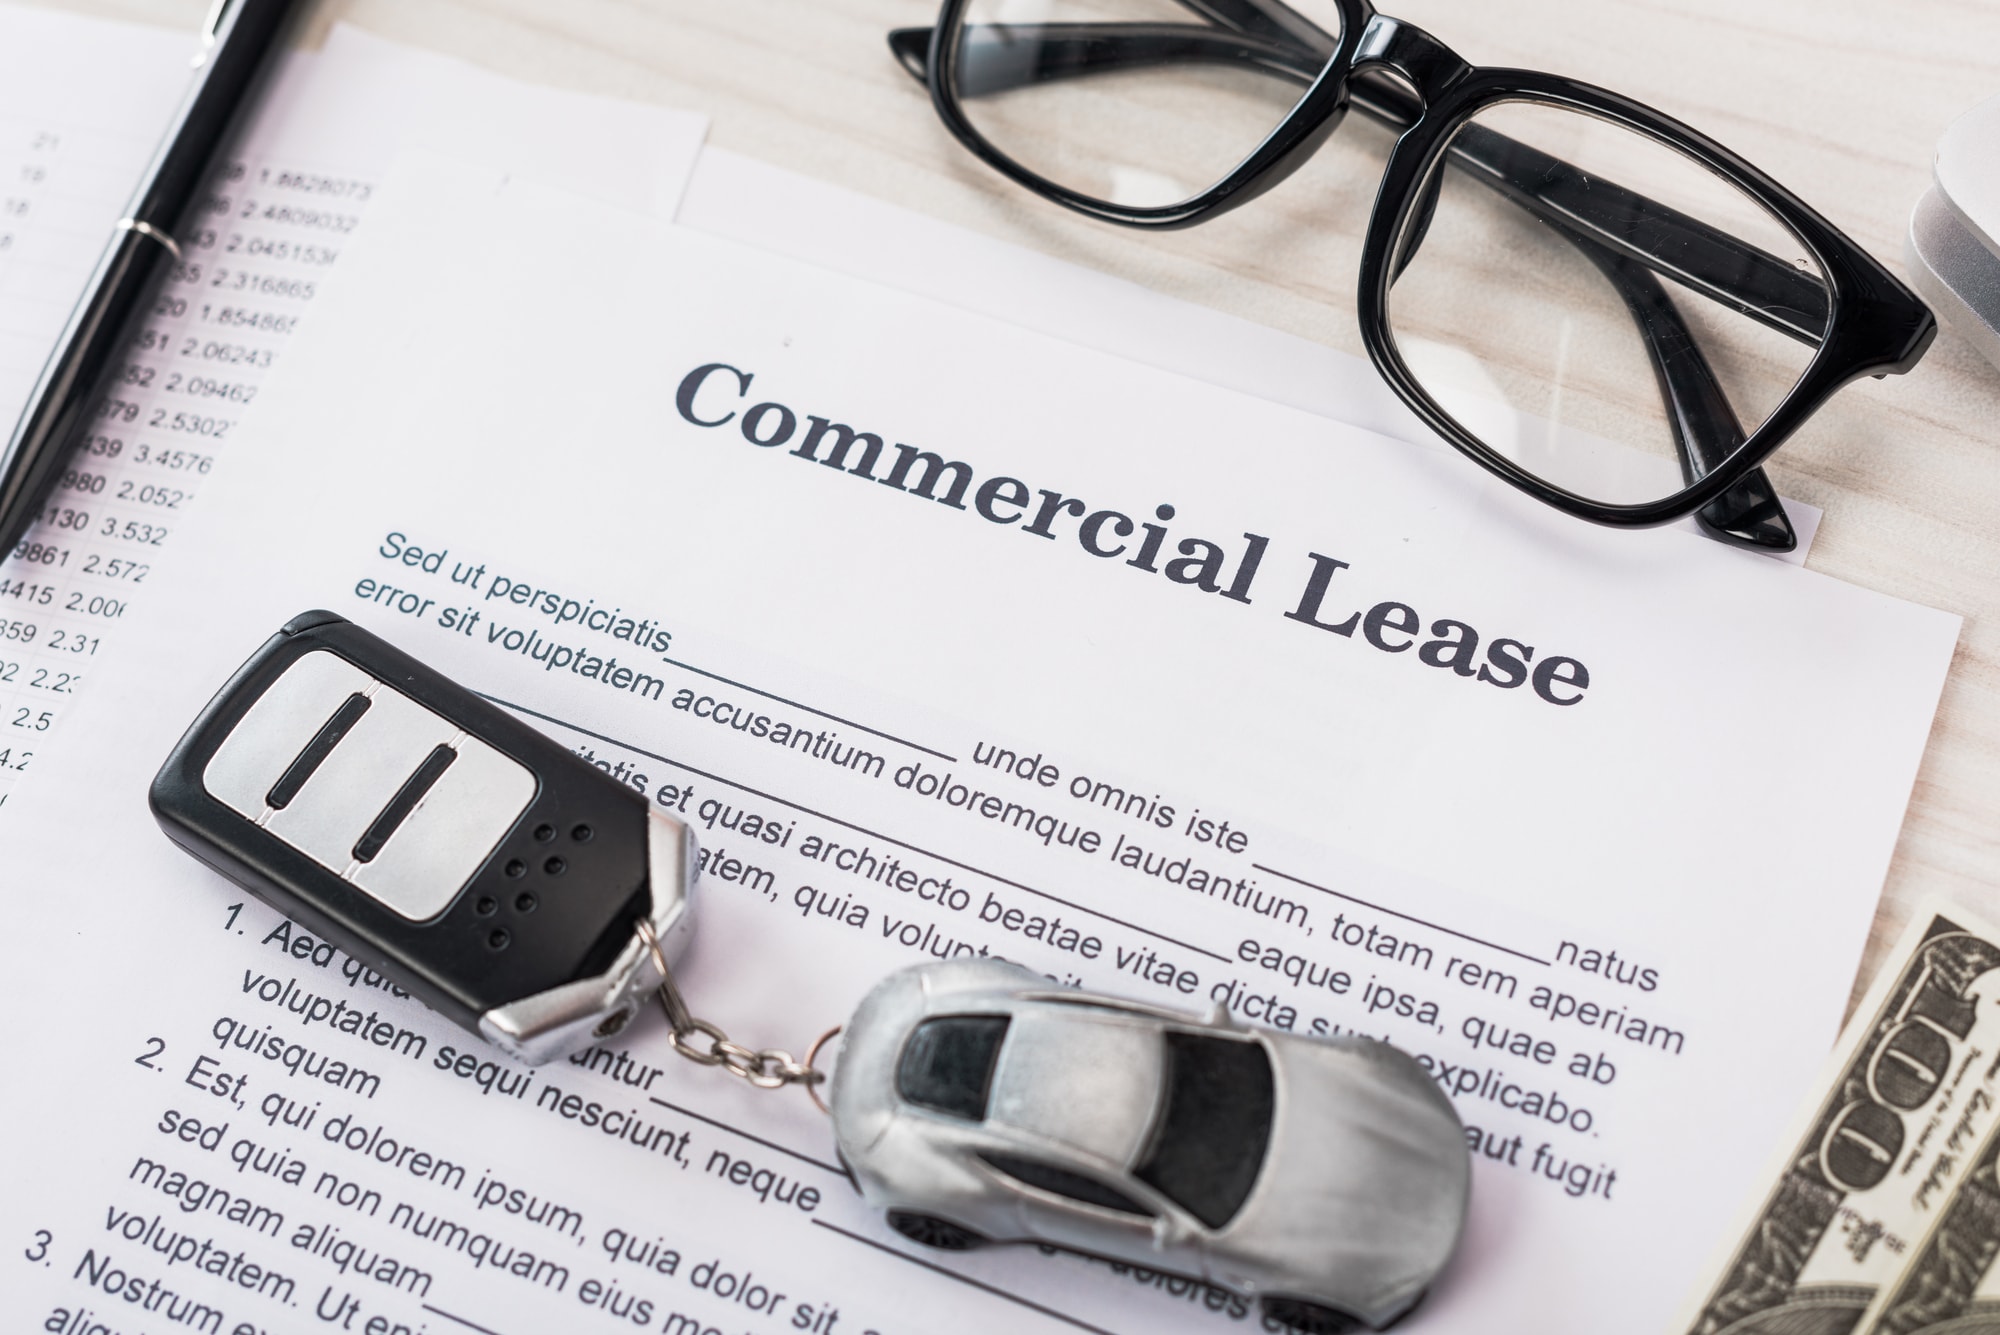 What Is AS-IS As It Relates To Commercial Leasing